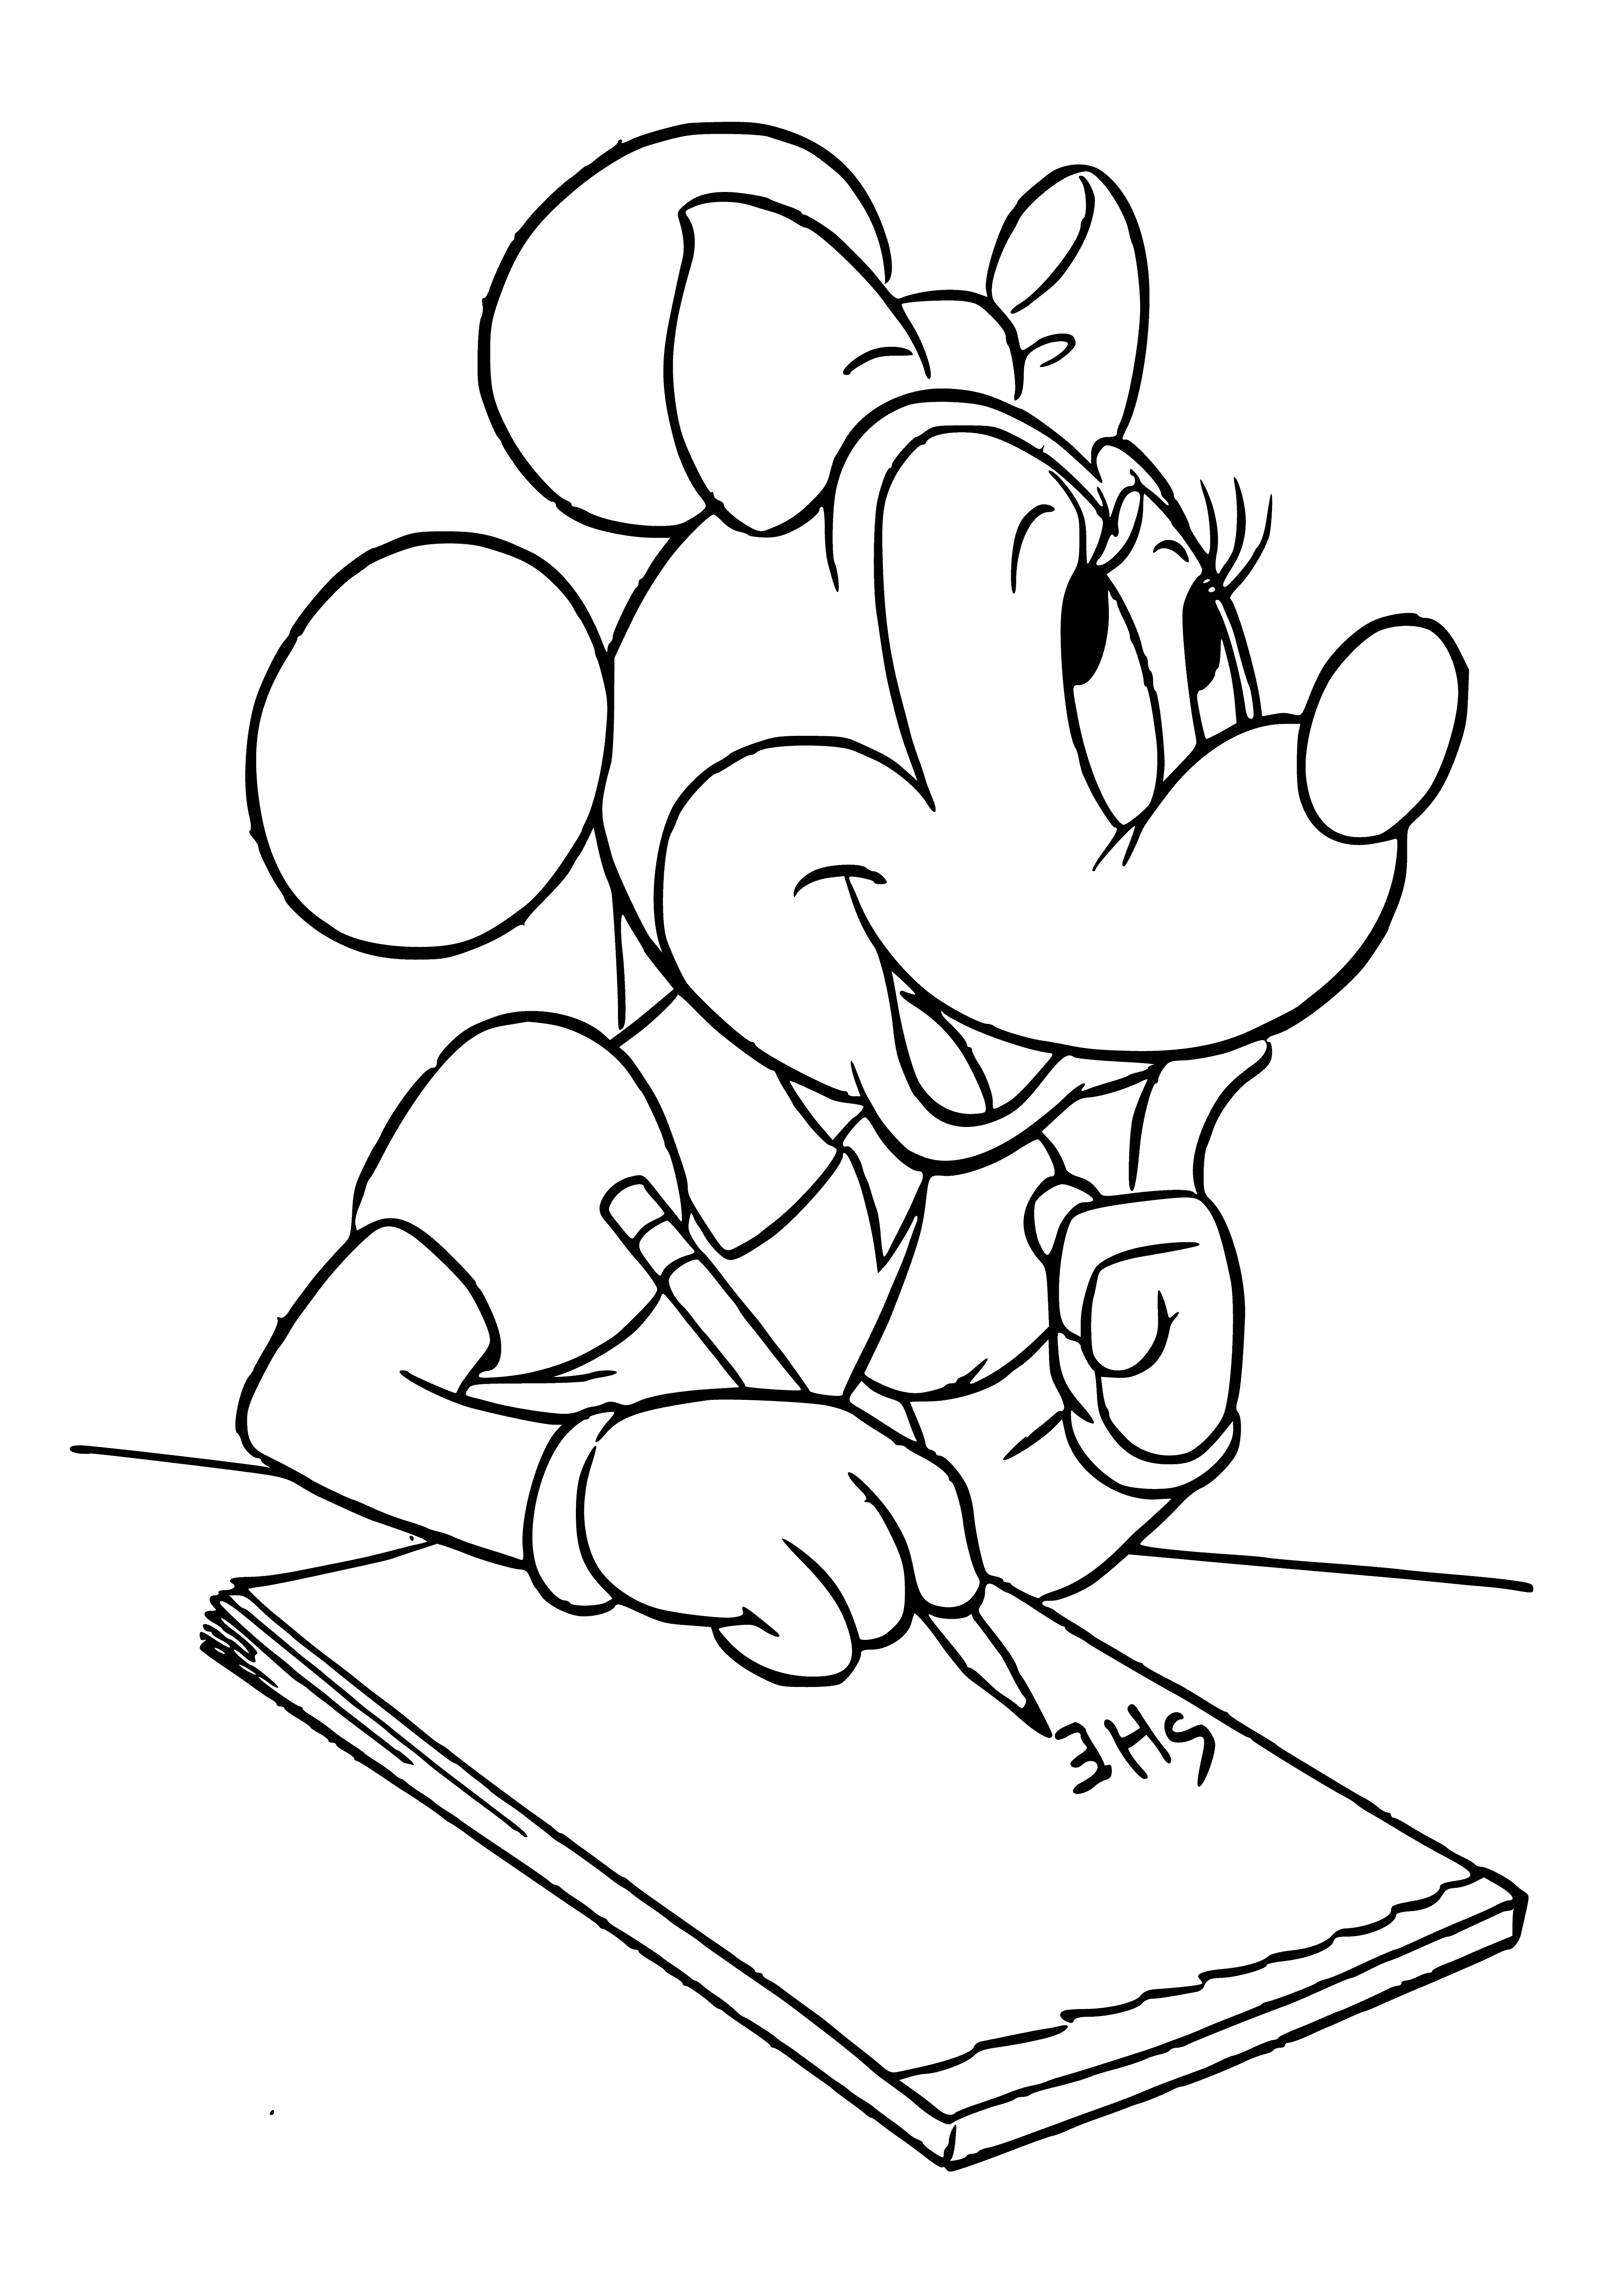 coloring page: A pen and Mickey Mouse paper with "The" written on it; a black and white coloring page. #coloring